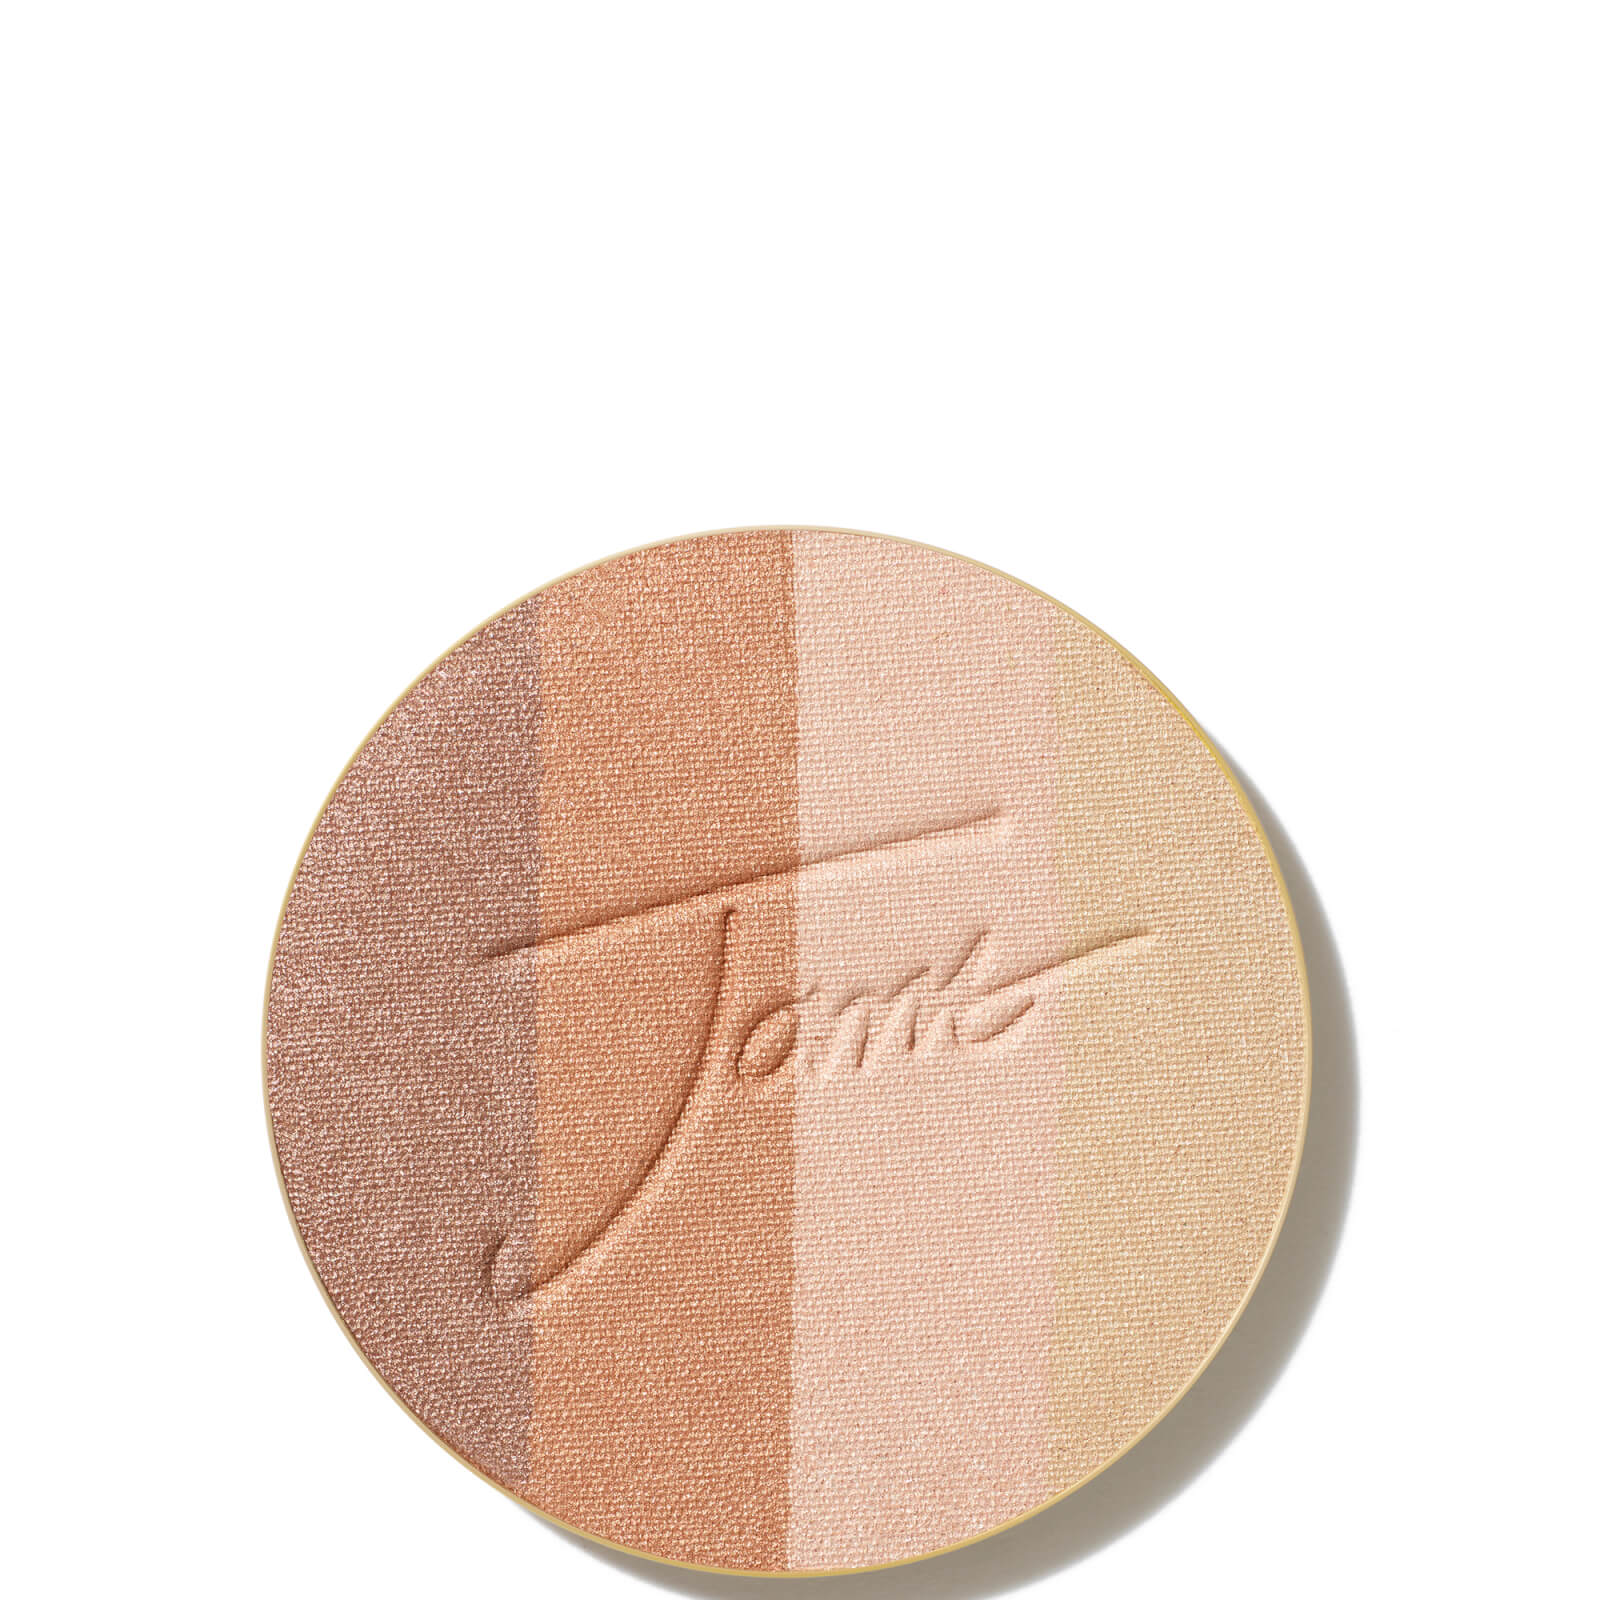 Jane Iredale Purebronze Shimmer Bronzer Refill In Moonglow